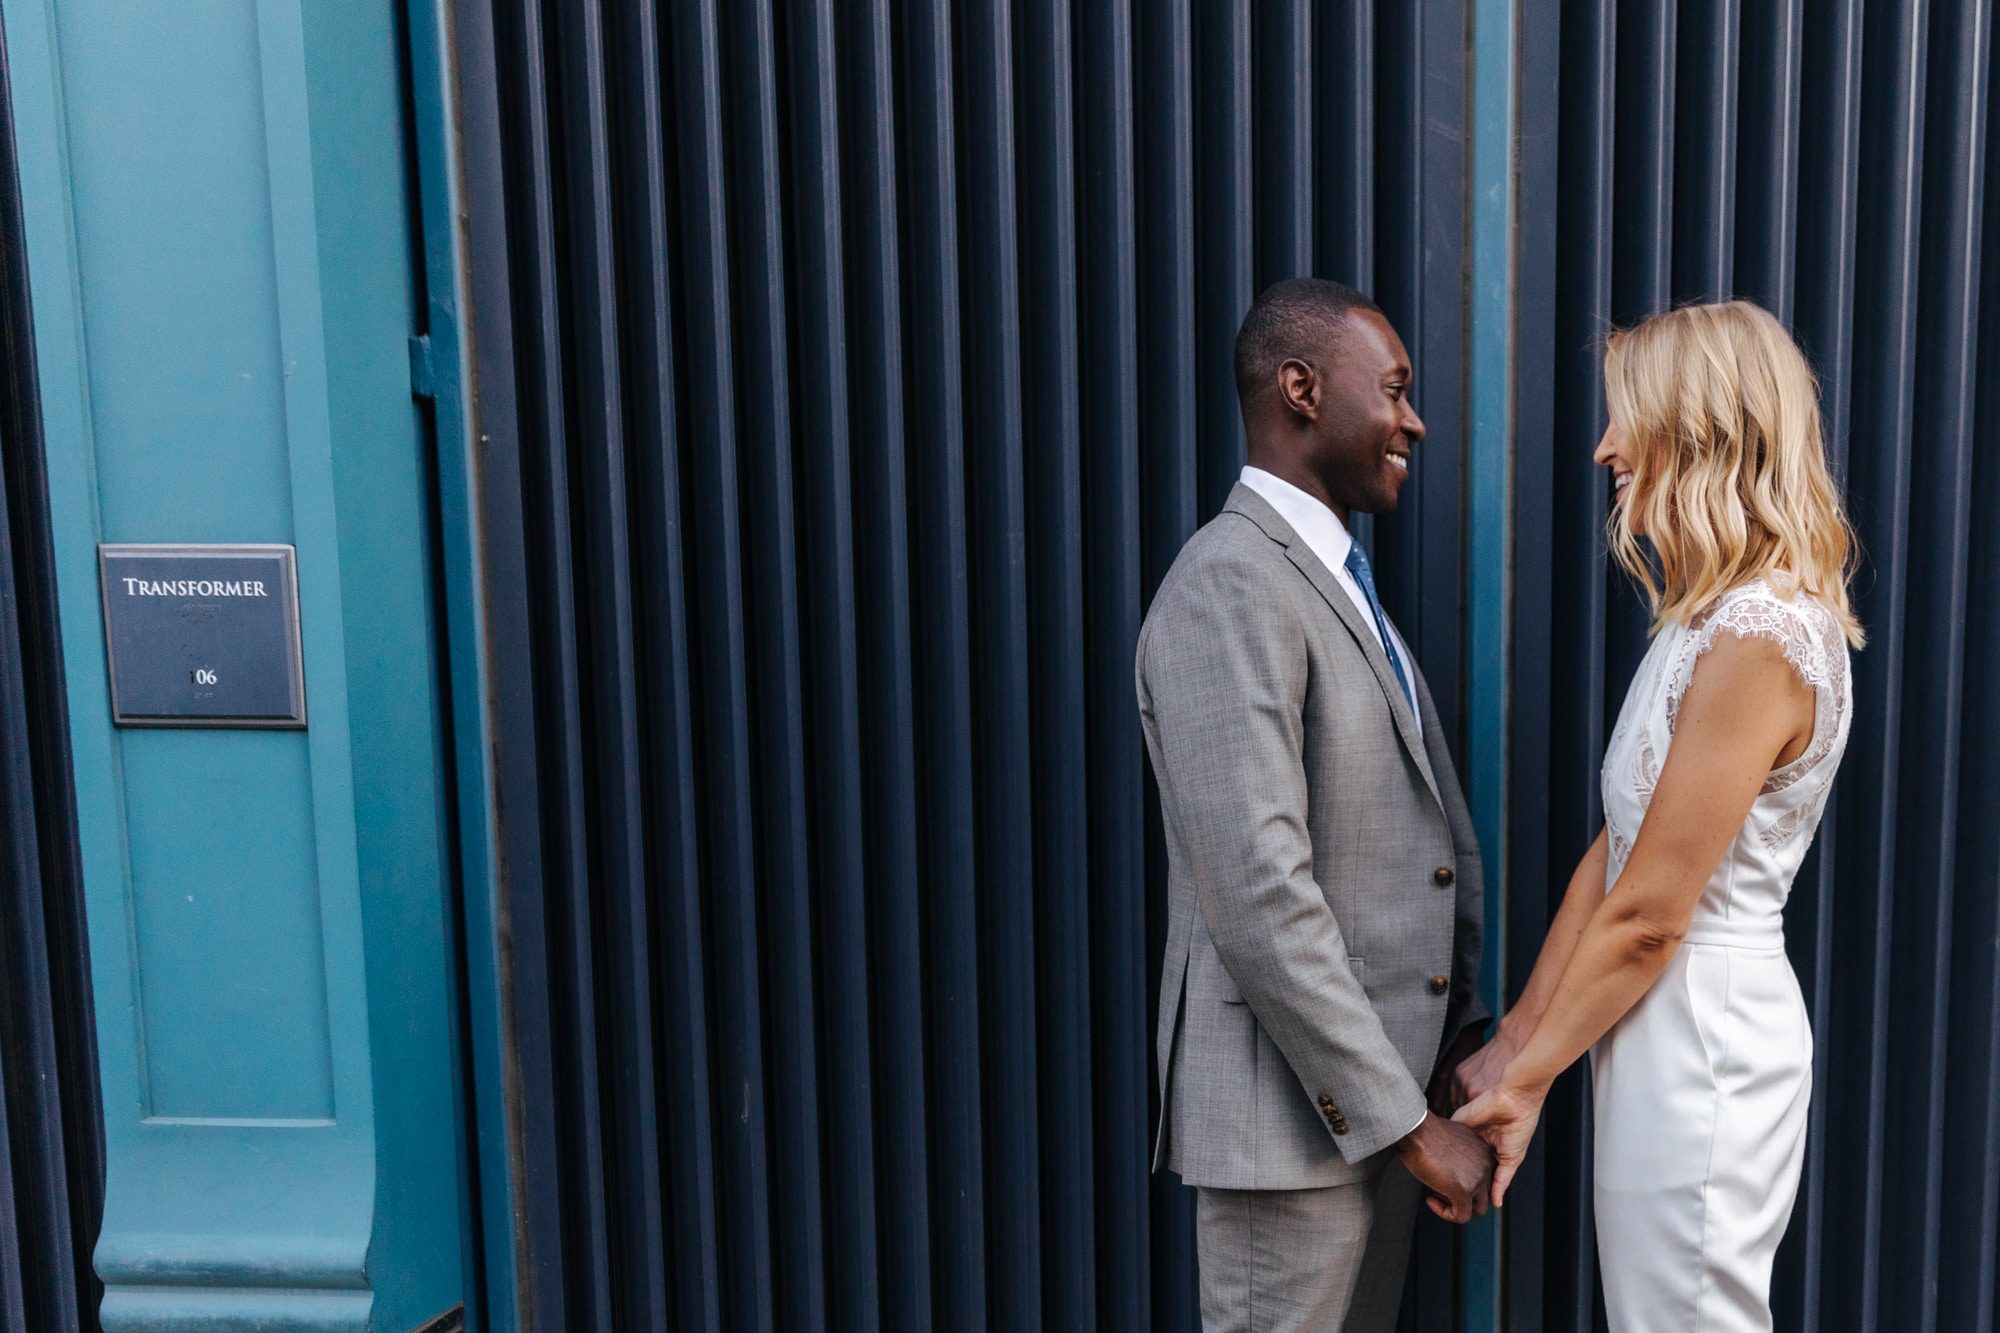 holding hands, formal outfit for elopement, outfit inspiration, bridal pantsuit, bridal jumpsuit, bride in pants, intimate wedding outfit, modern wedding outfits, courthouse wedding outfit, urban wedding photos, modern wedding photos, city wedding, colorado wedding photographer, colorado elopement, colorado wedding photographer